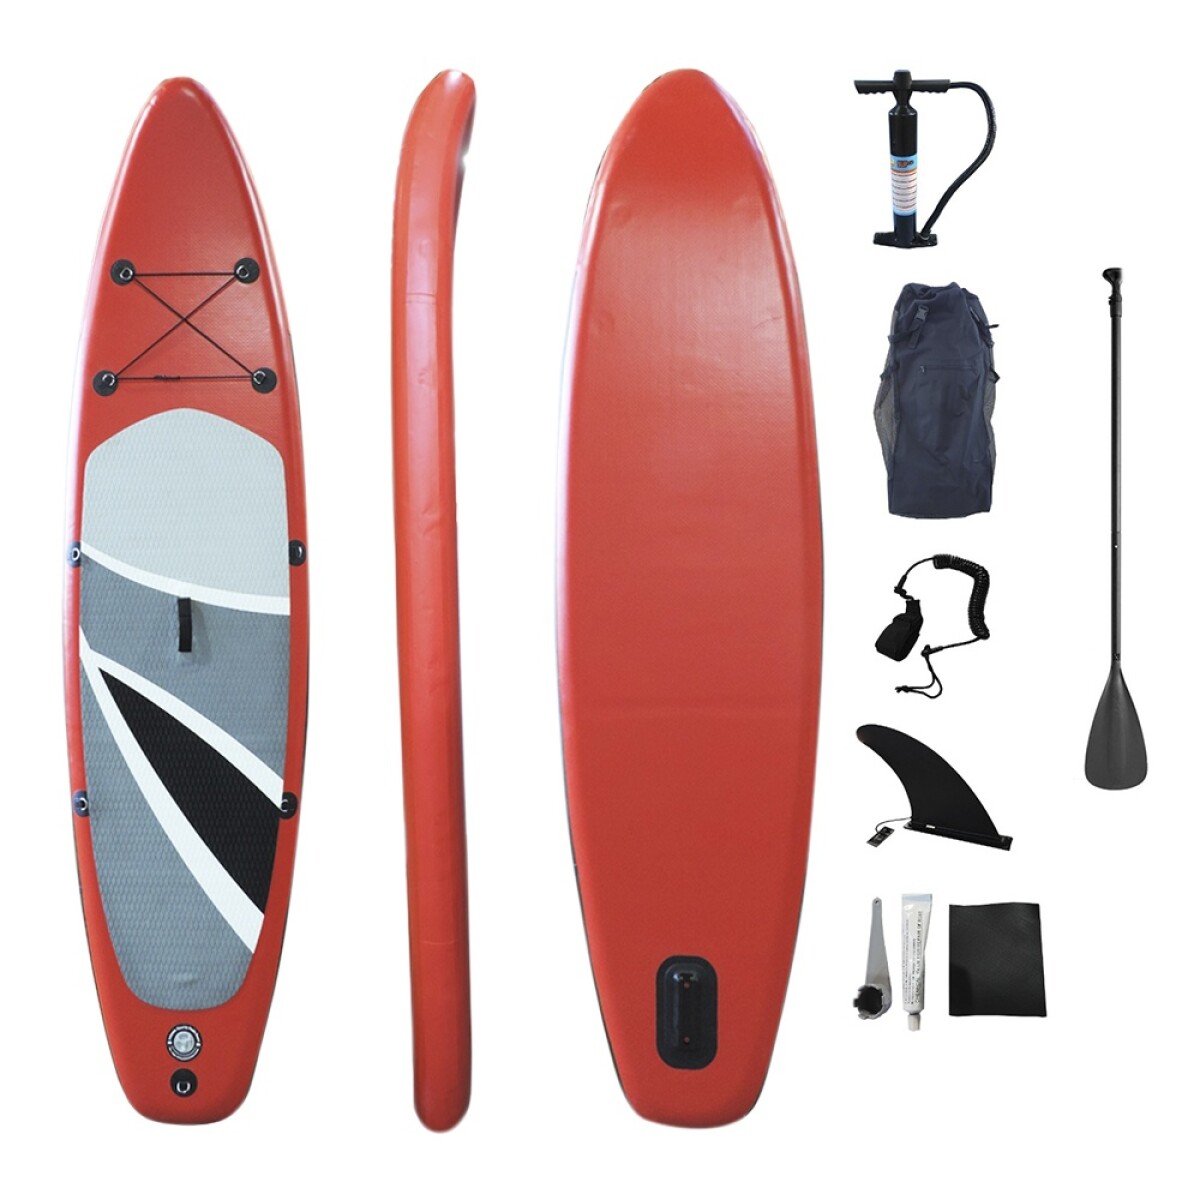 Tabla Stand Up Paddle Sup 320 + Remo + Inflador + Bolso - Rojo 